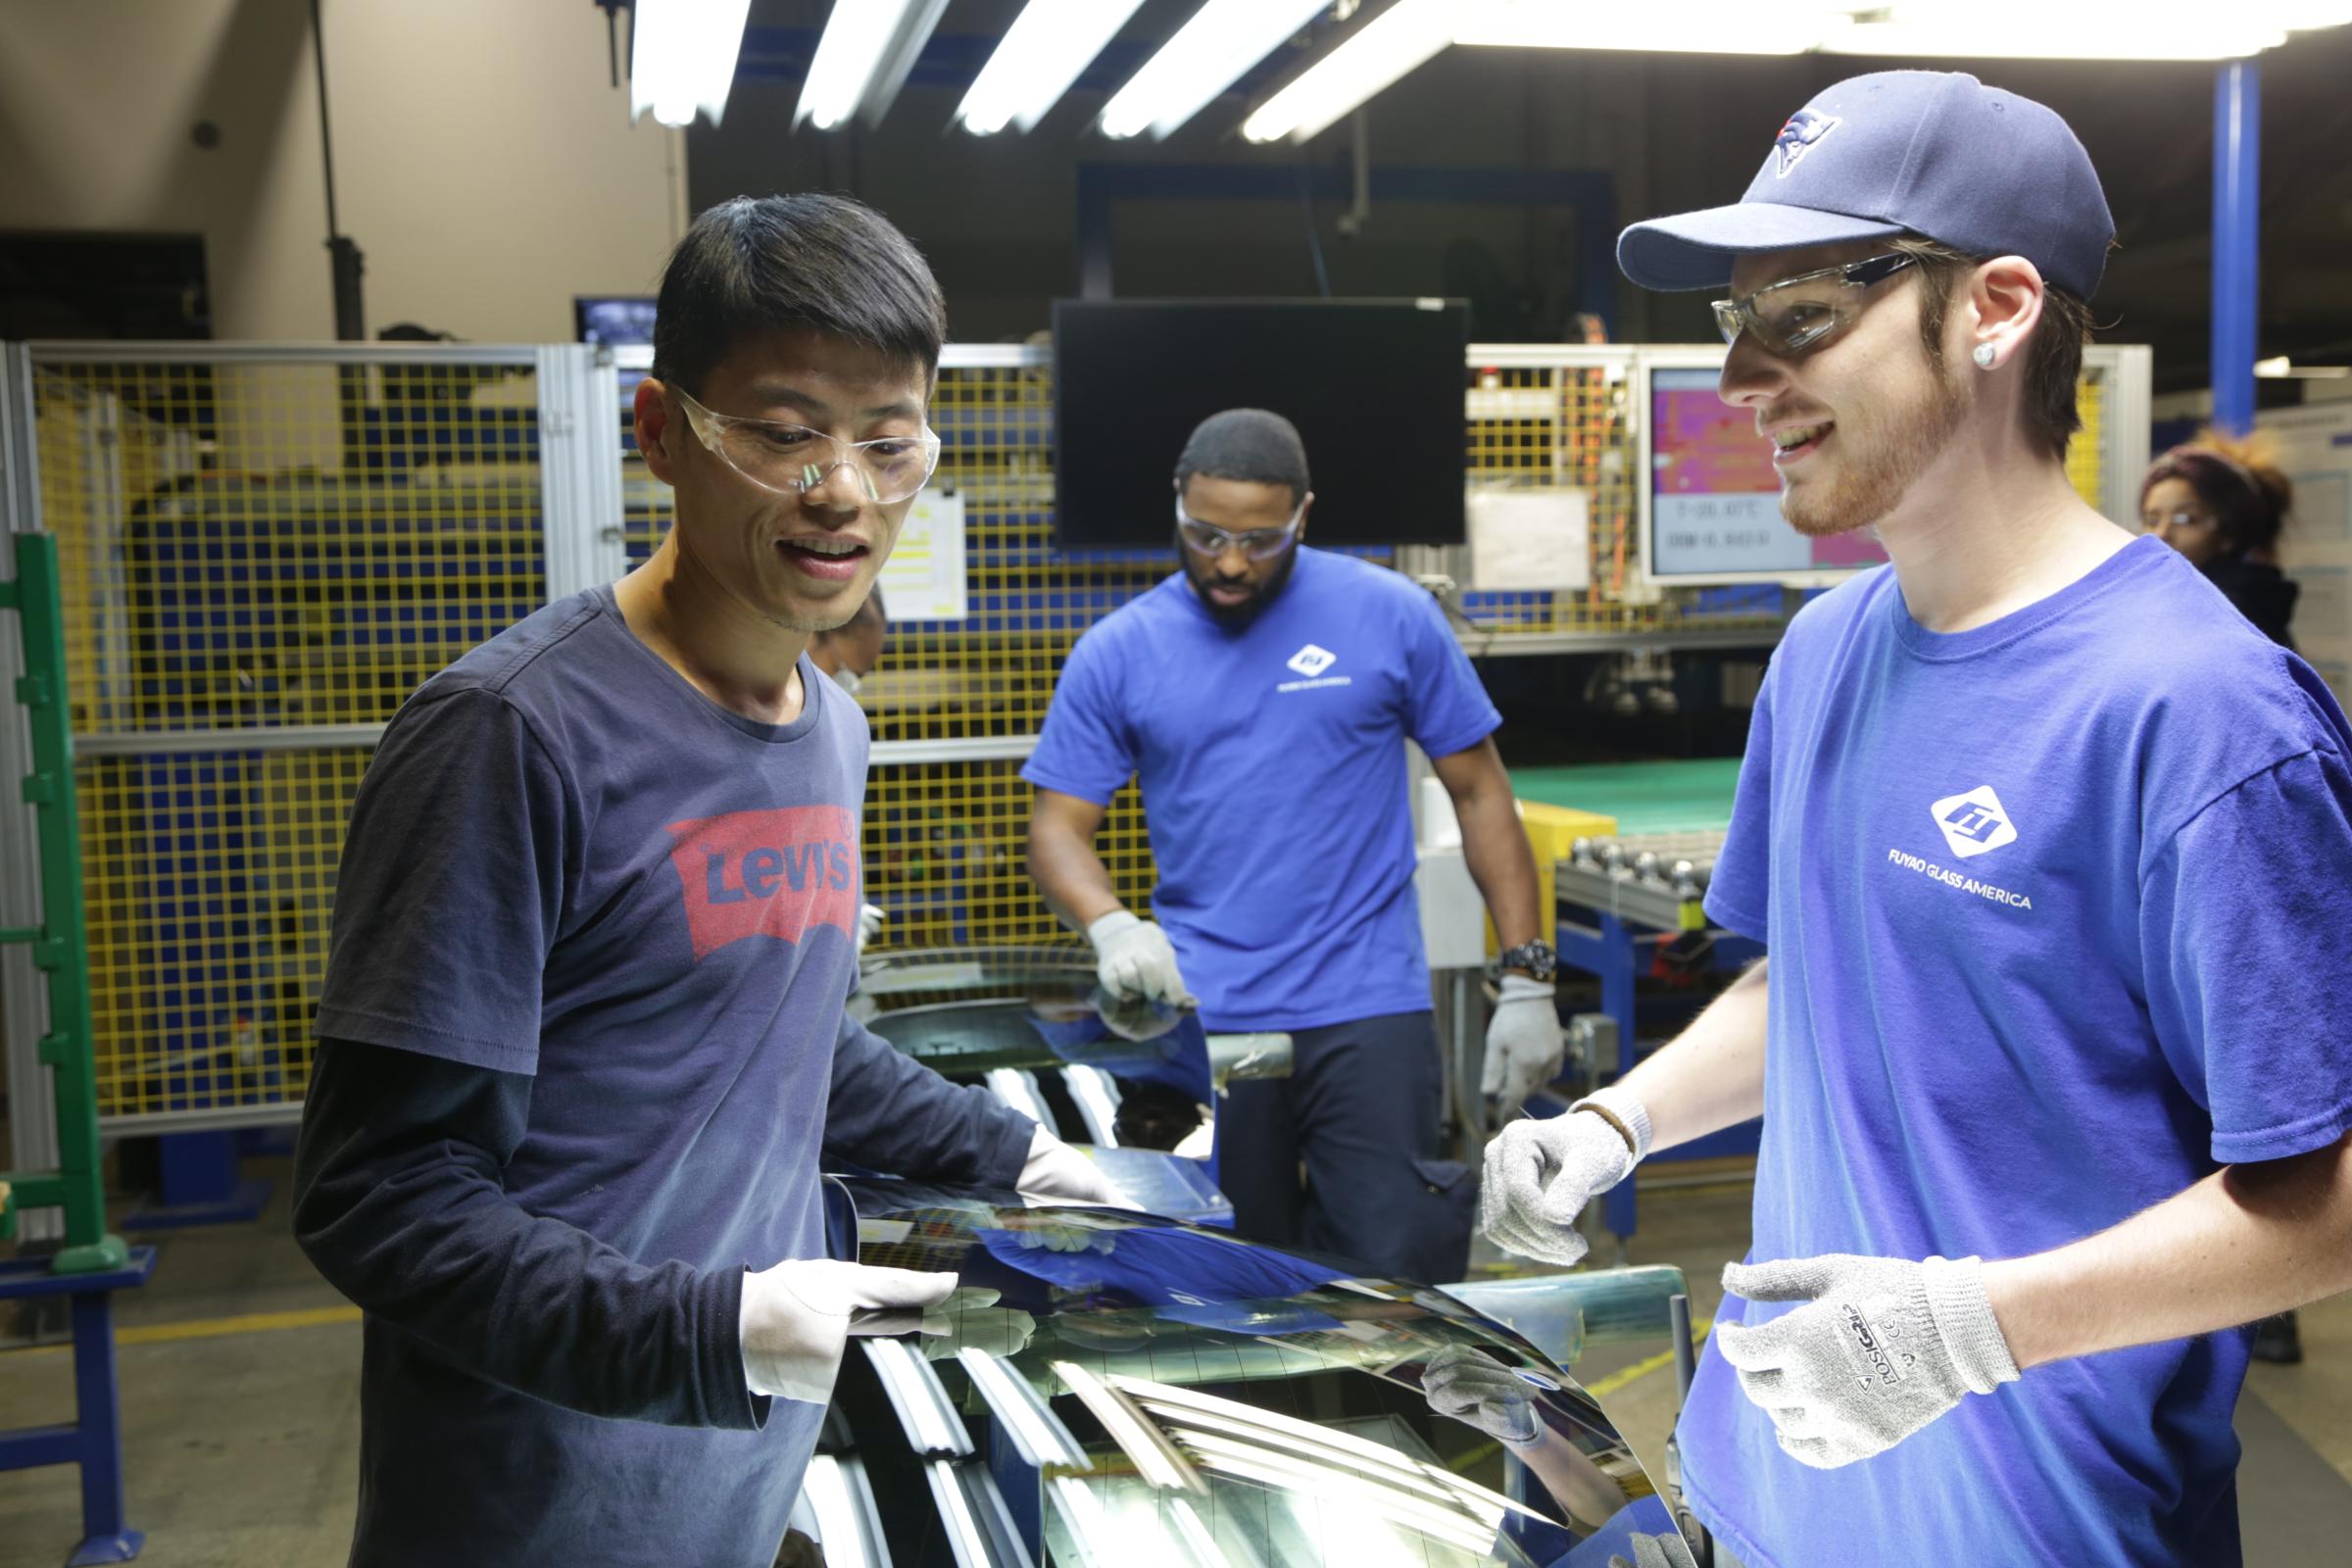 Wong He (left) working with Kenny Taylor (Center) and Jarred Gibson (Right) in the furnace tempering area of the Fuyao factory in the Dayton, Ohio from the film AMERICAN FACTORY